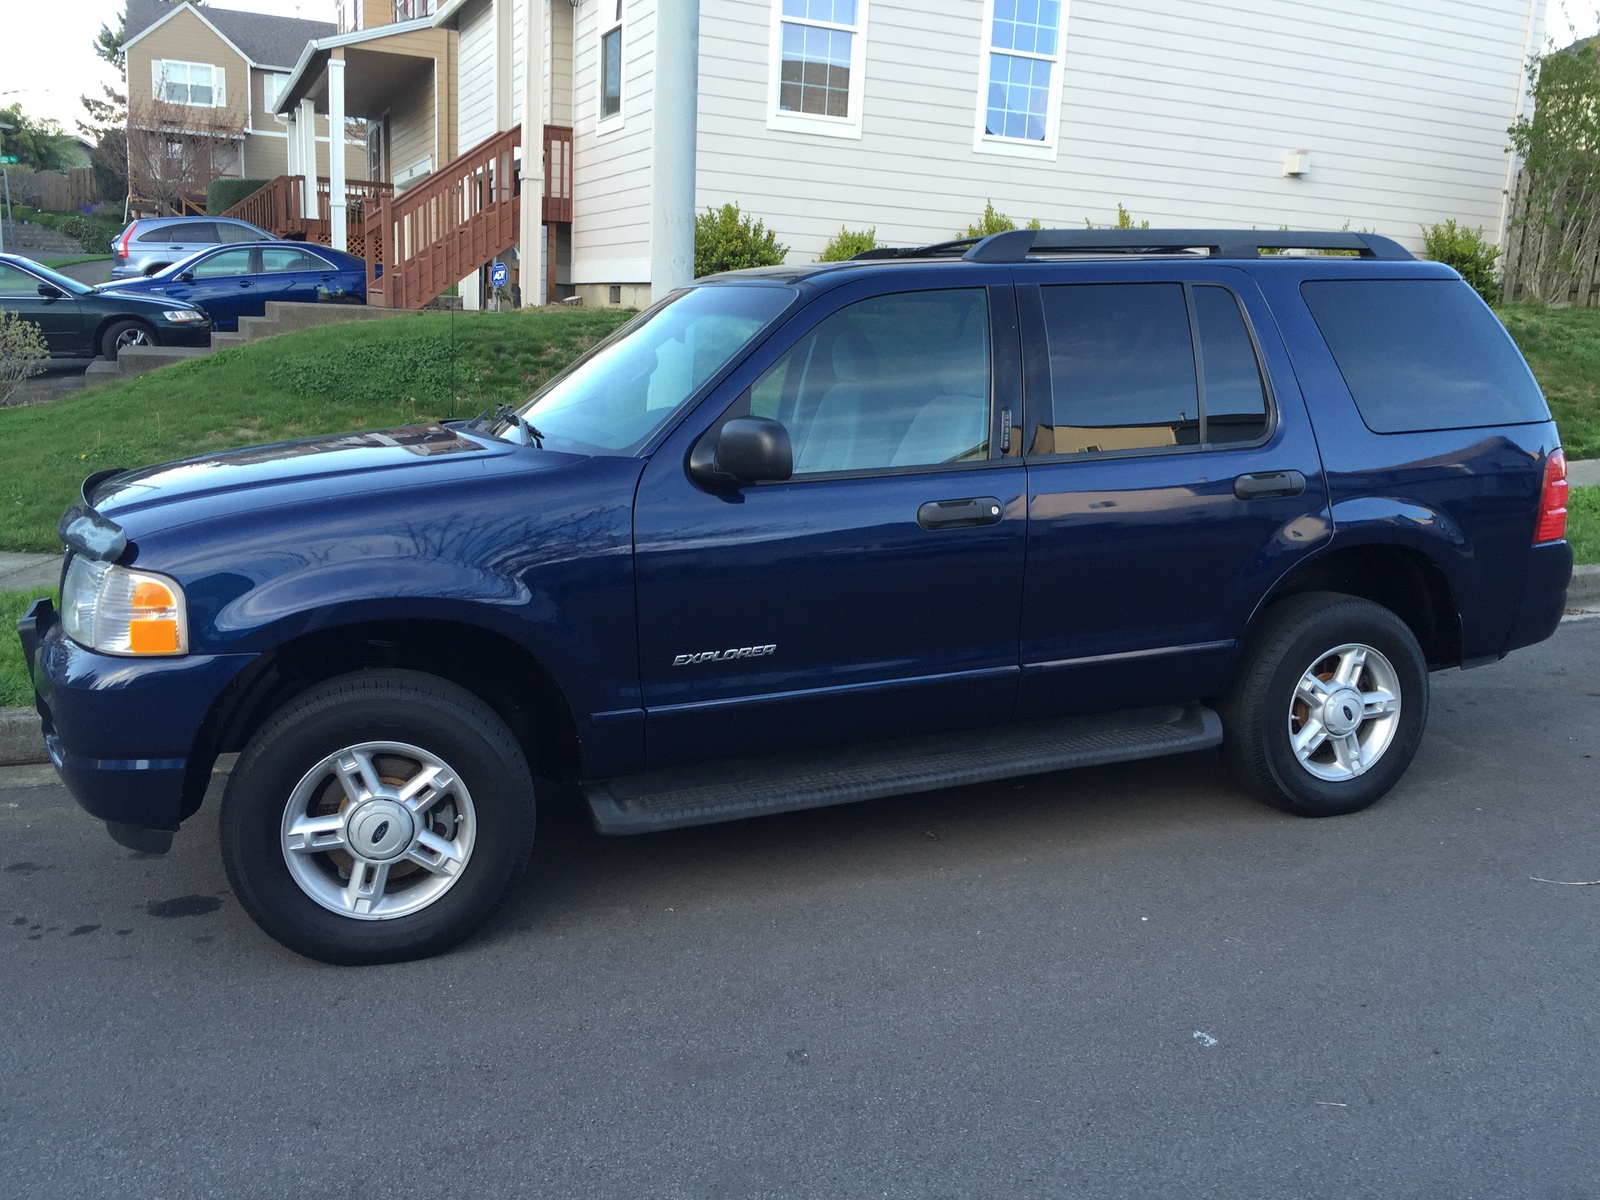 2005 Ford explorer tune up cost #8